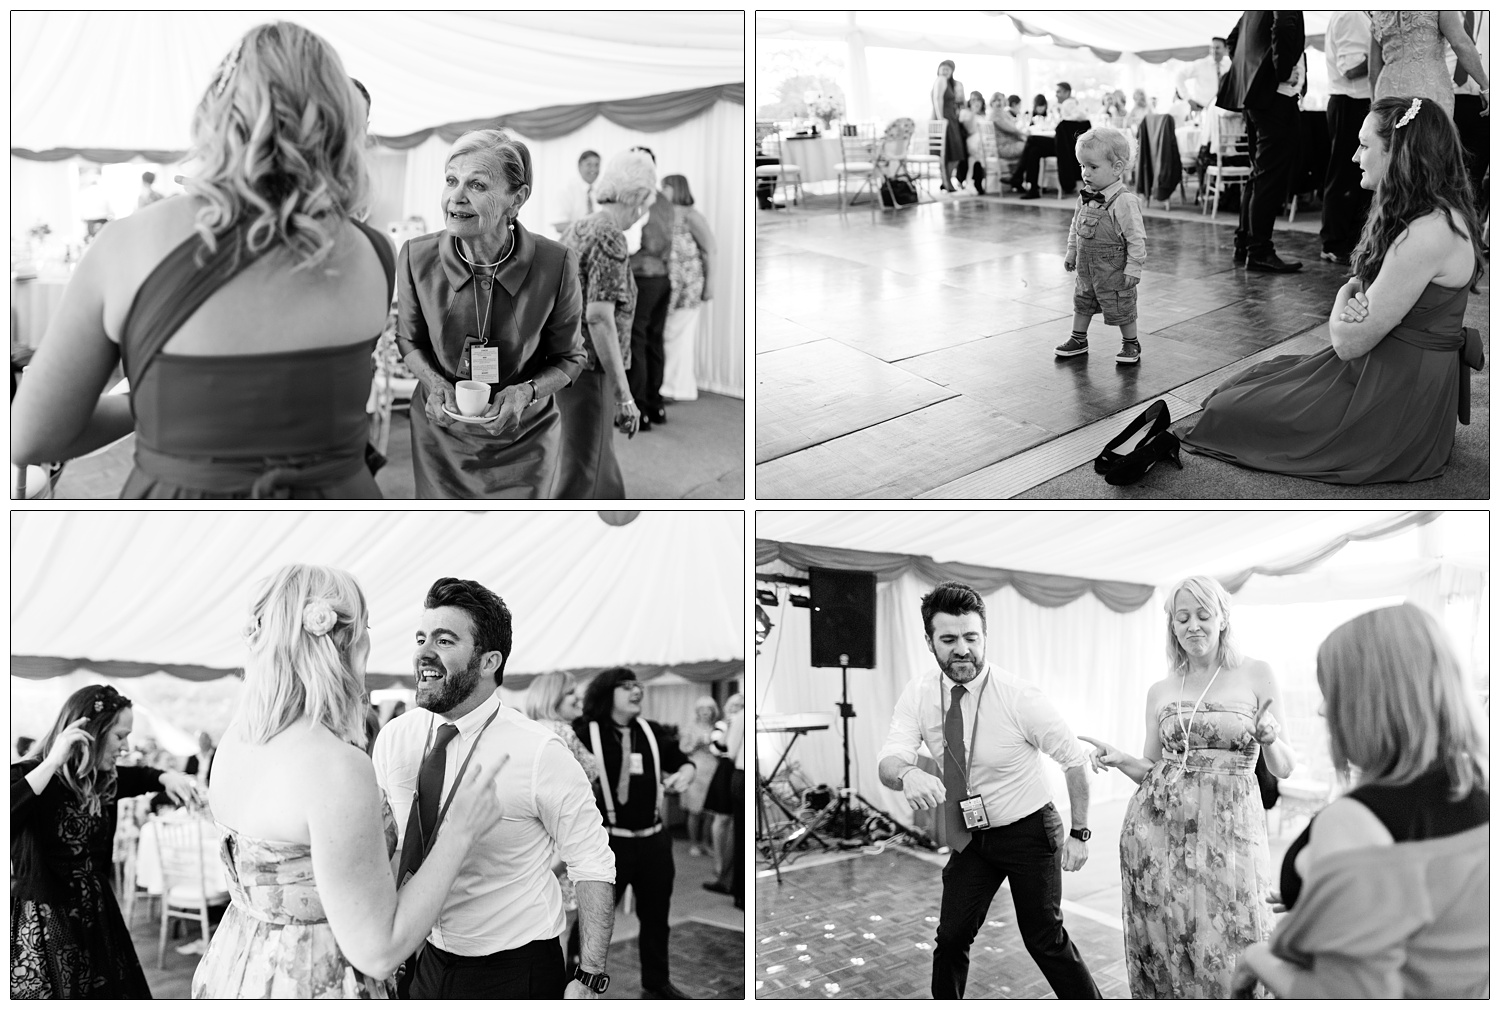 Candid black and white photographs of people dancing at a wedding reception in a marquee.